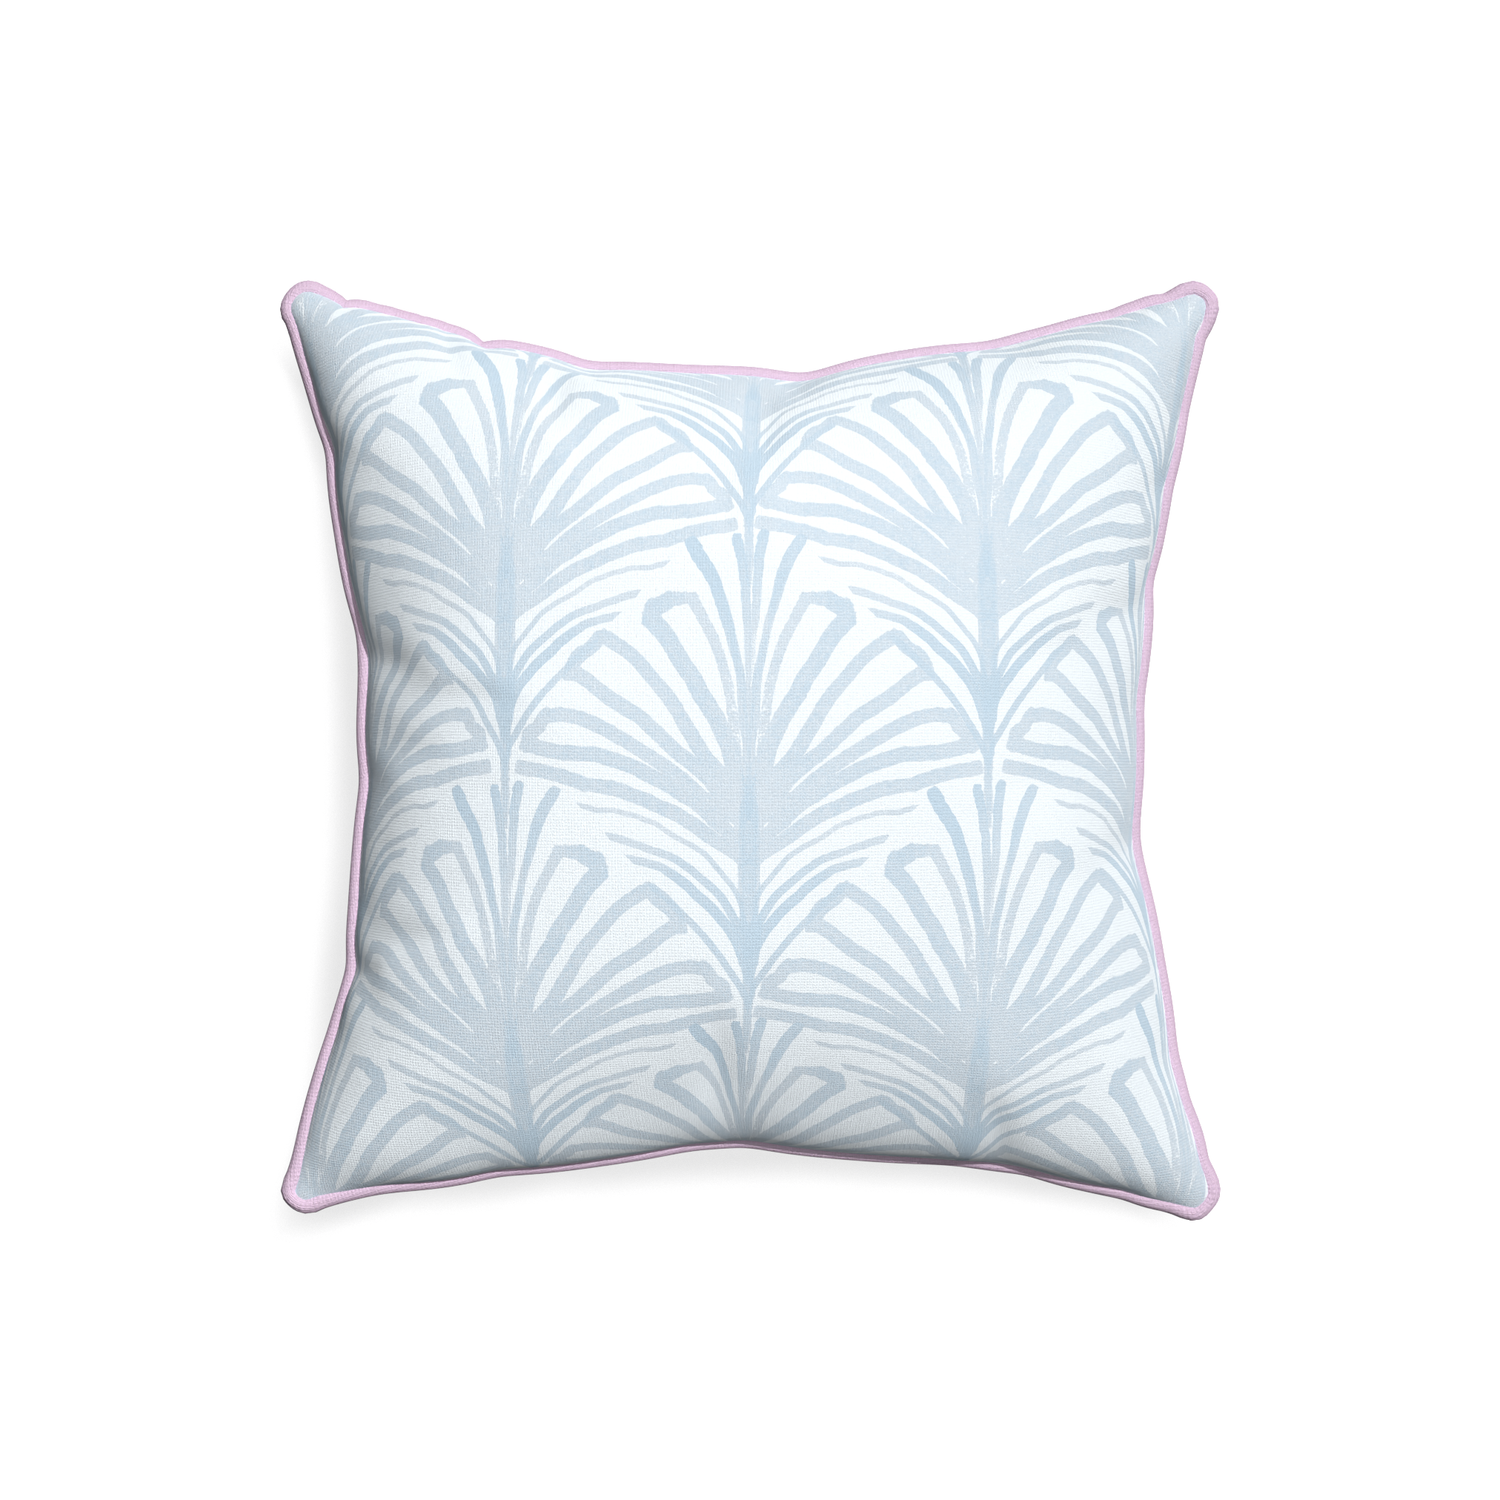 20-square suzy sky custom pillow with l piping on white background